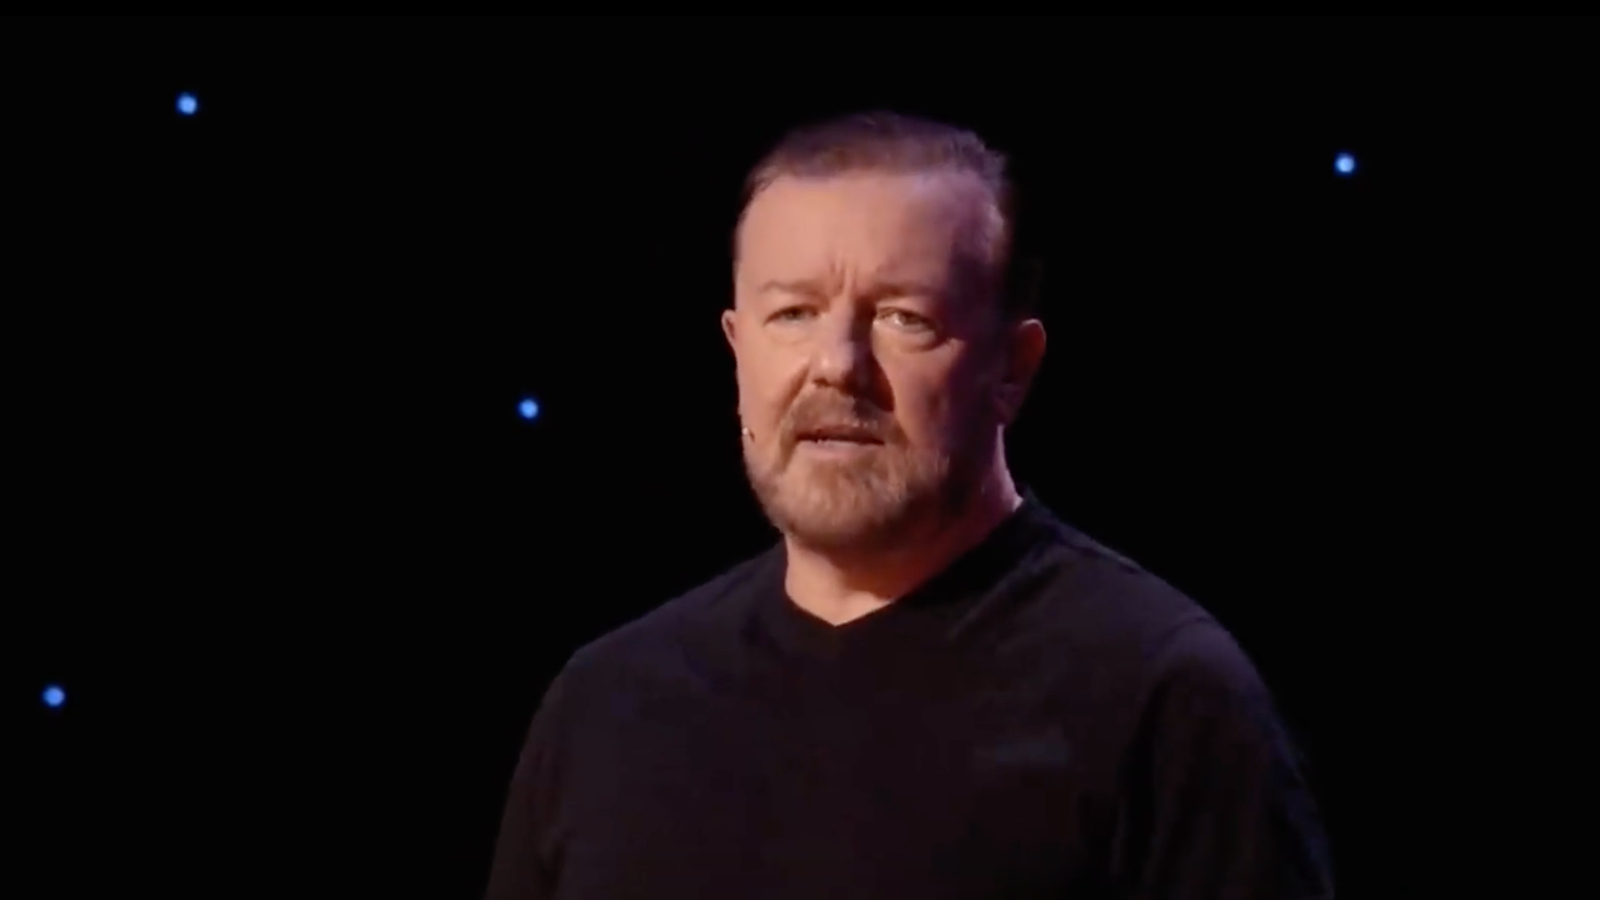 Ricky Gervais says new Netflix comedy SuperNature is not anti-trans